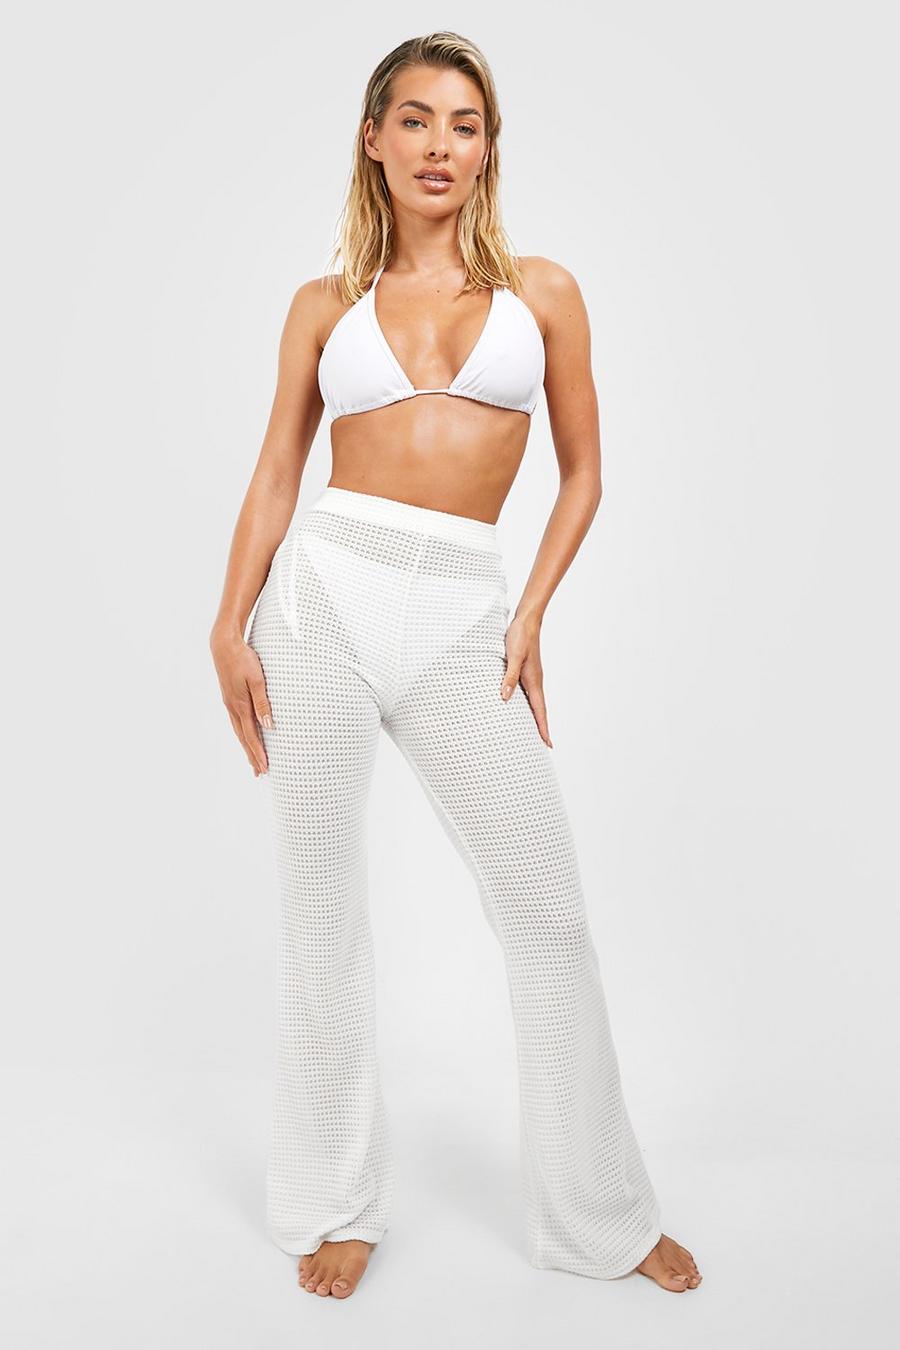 White Crochet Knit Flared Beach Pants image number 1